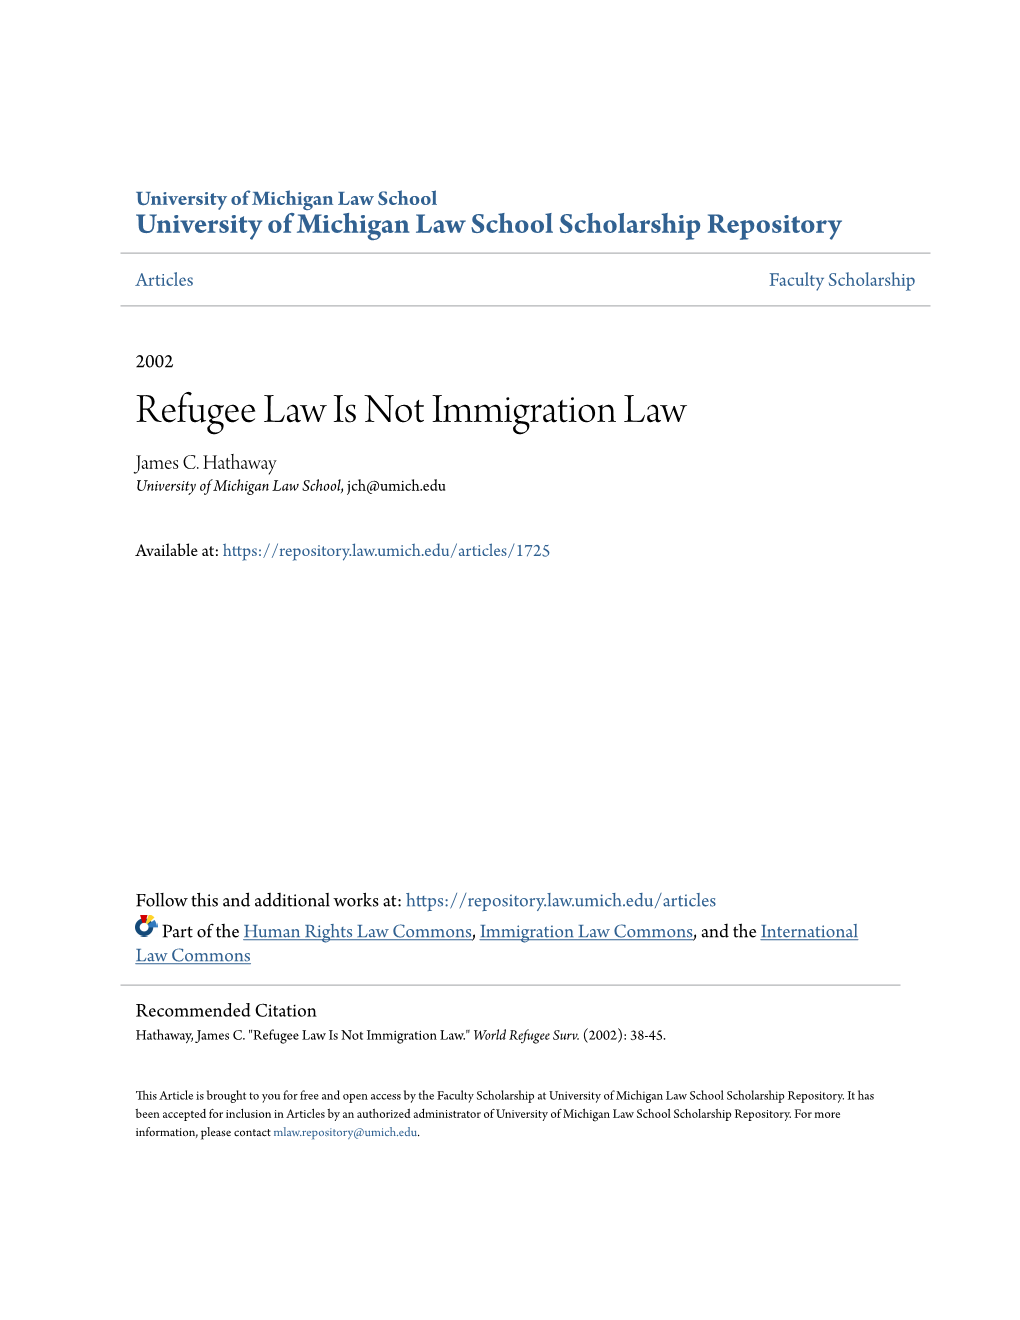 Refugee Law Is Not Immigration Law James C